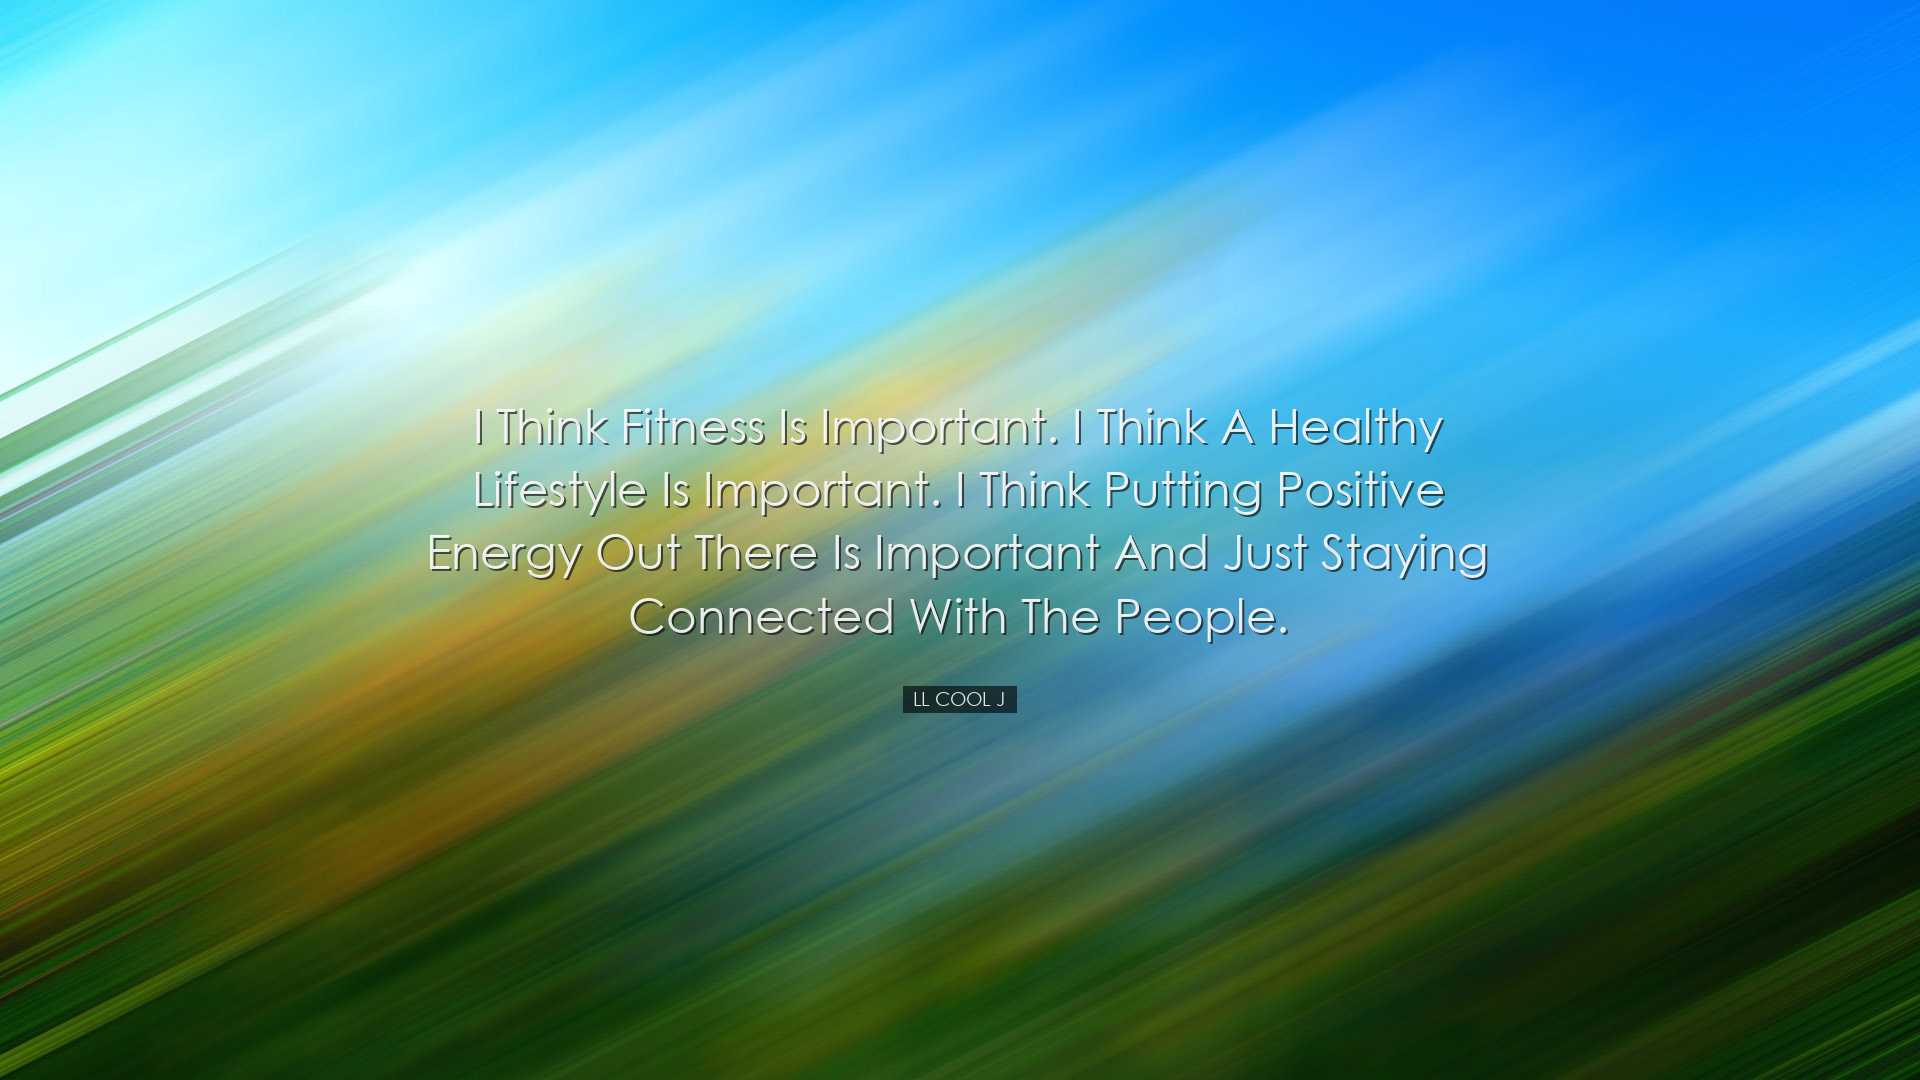 I think fitness is important. I think a healthy lifestyle is impor